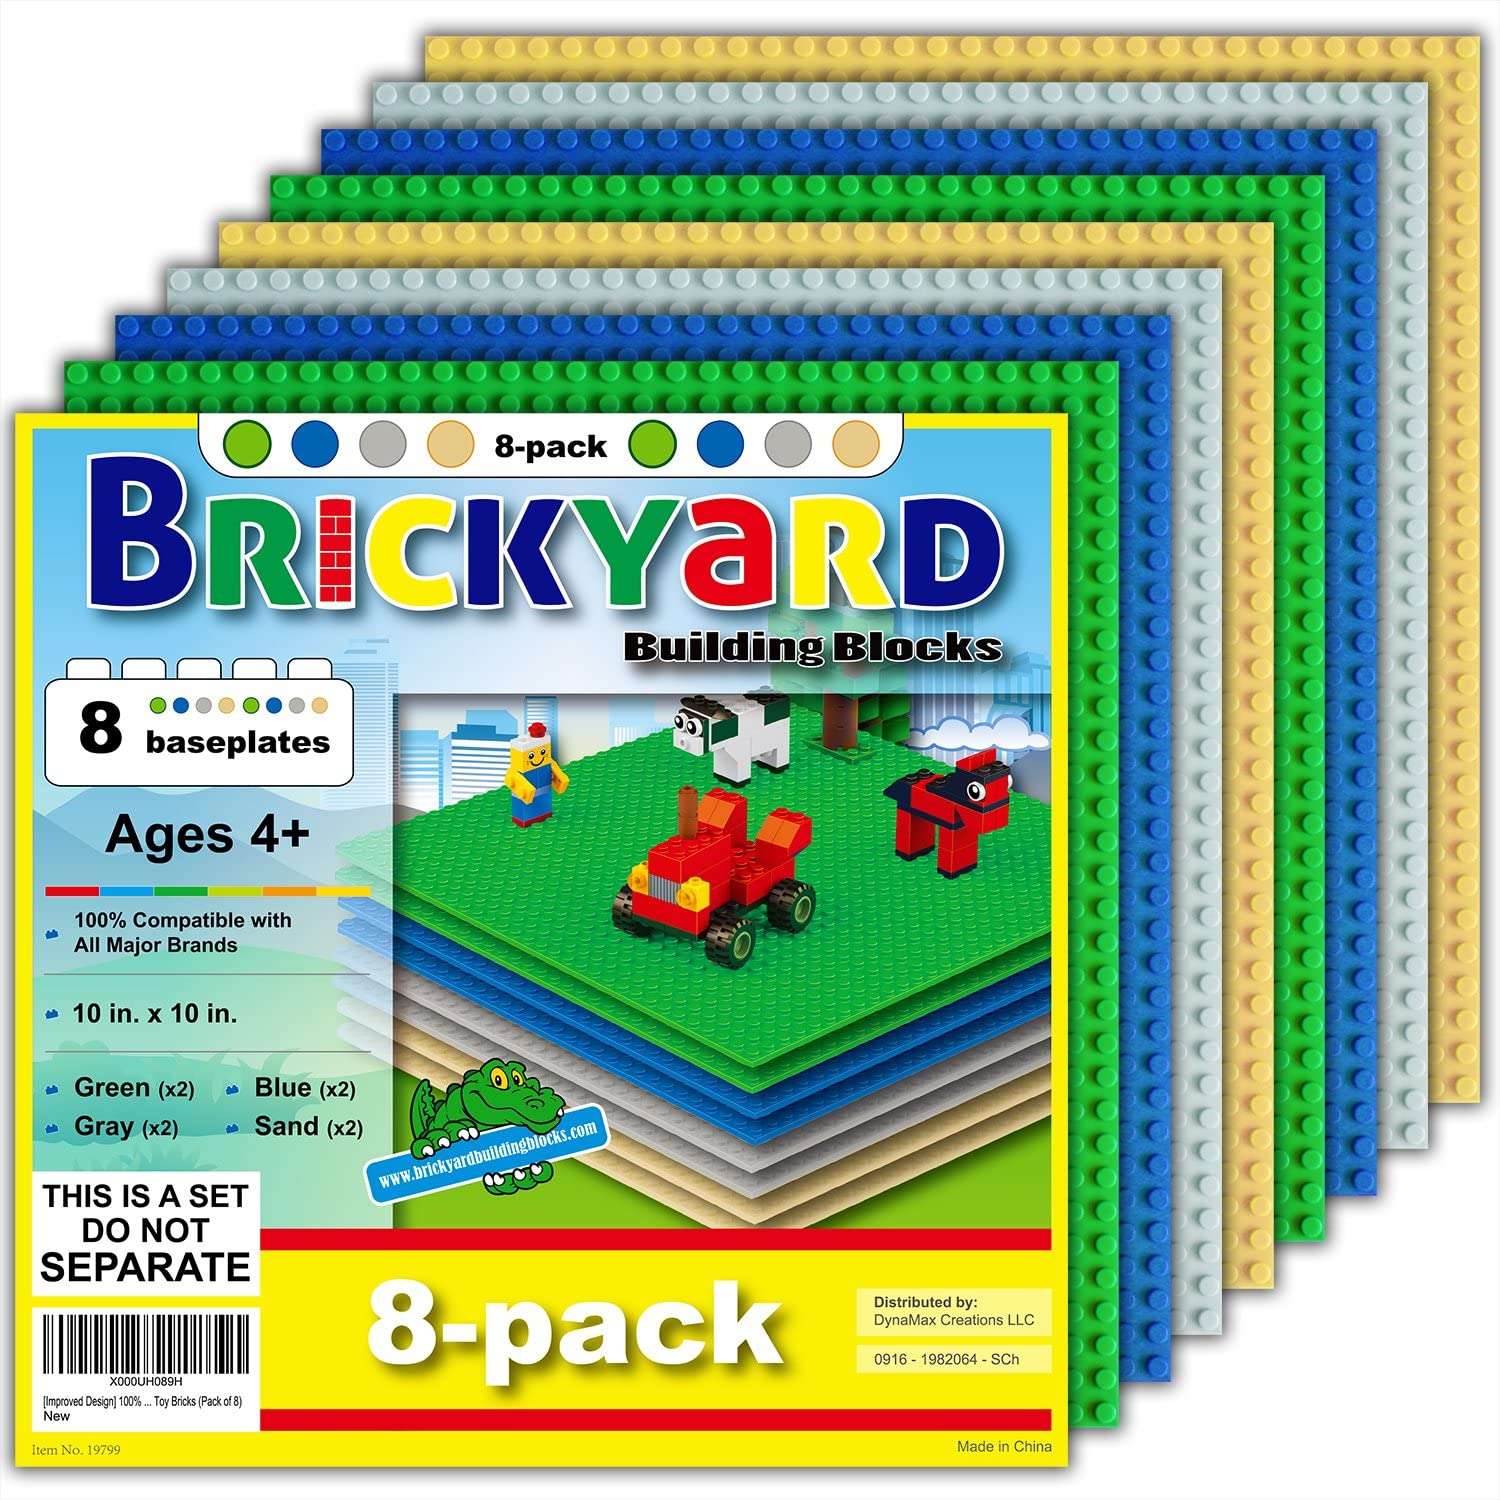 for Activity Table or Displaying Compatible Construction Toys Brickyard Building Blocks 4 White Baseplates 4-Pack, White Improved Design 10 x 10 Inches Large Thick Base Plates for Building Bricks 